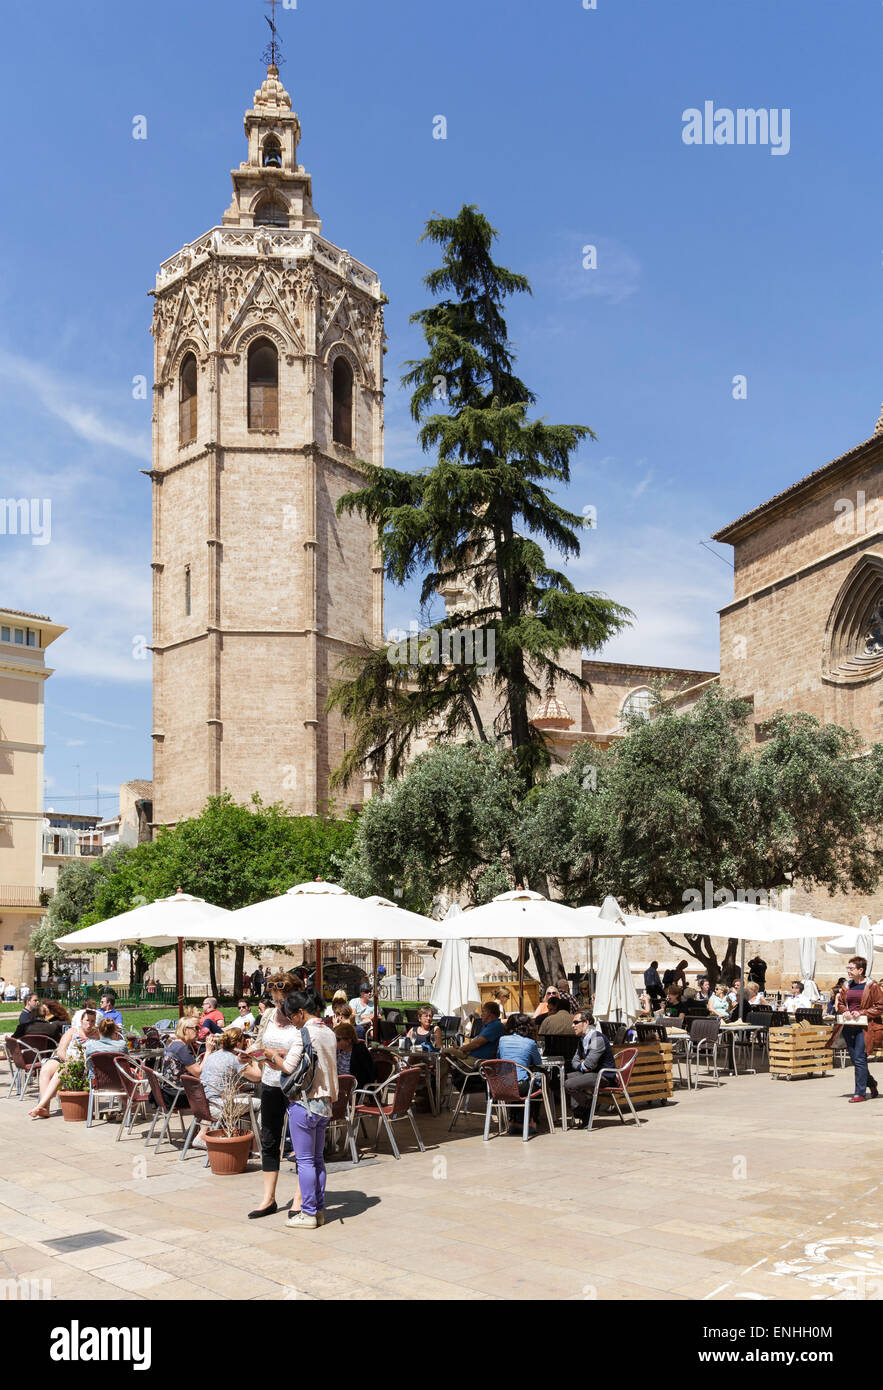 pavement cafe and tourists in front of the Cathedral, Valencia, Spain Stock Photo